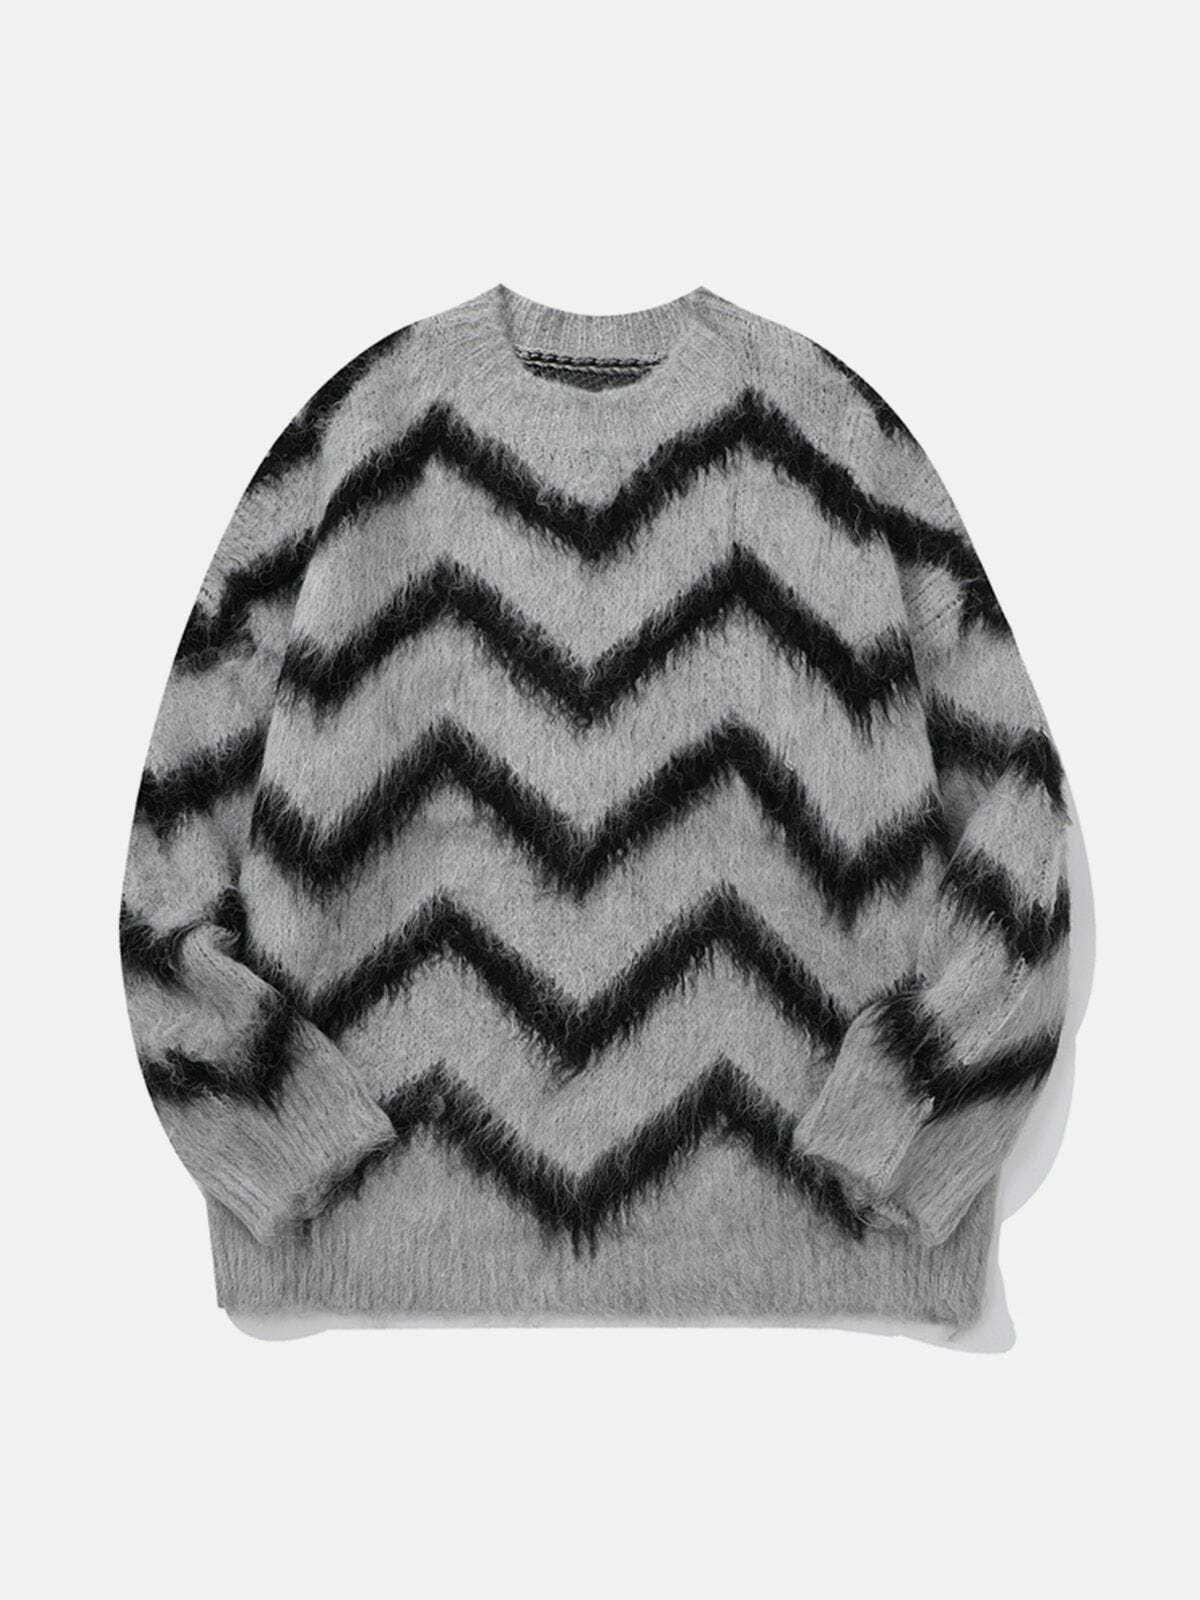 mohair striped sweater edgy & retro streetwear glamour 3076